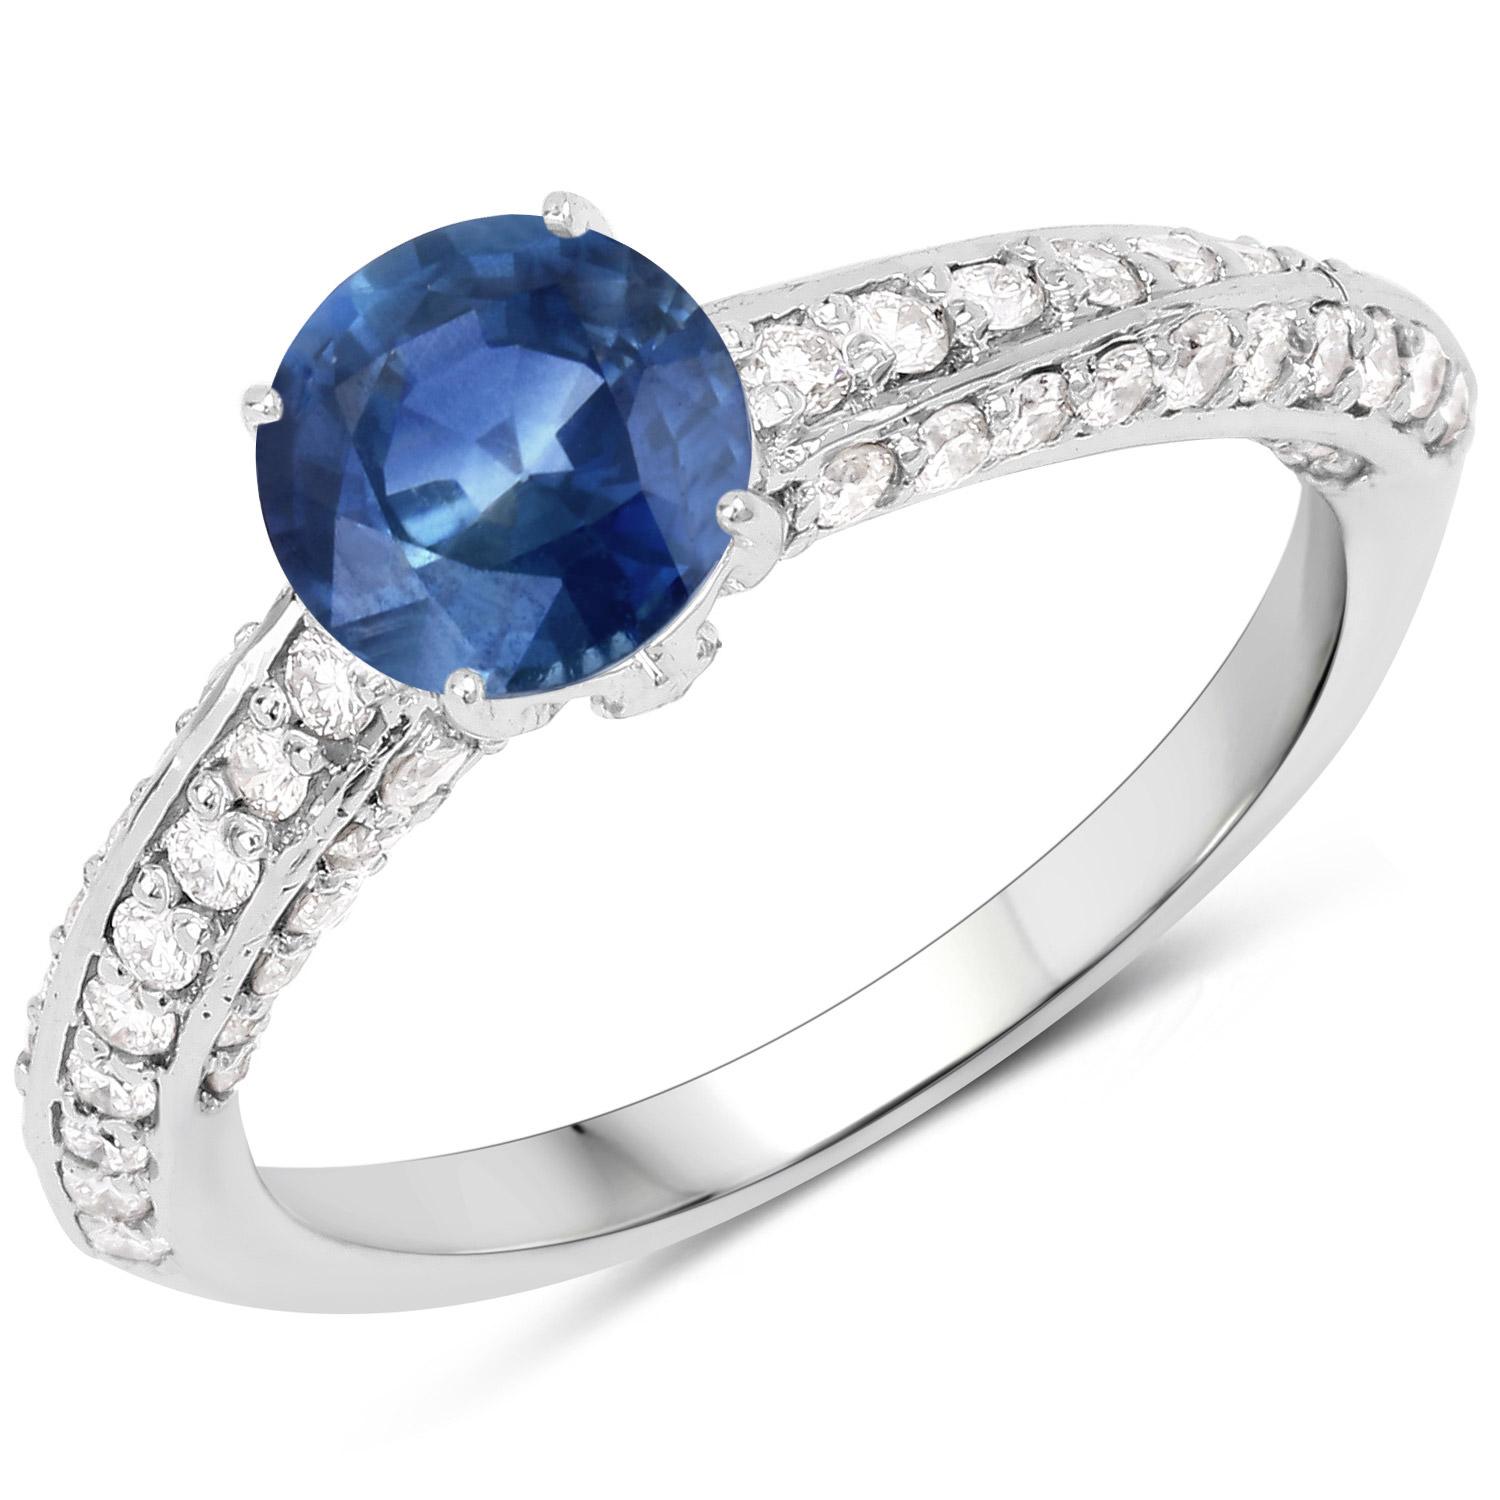 It comes with the appraisal by GIA GG/AJP
Sapphire = 1 Carat
Cut: Round
Stone Size: 6 mm
Diamonds = 0.60 Carats
Metal: 14K White Gold
Height: 7 mm
Width: 23 mm
Length: 7 mm
Ring Size: 7* US
*It can be resized complimentary